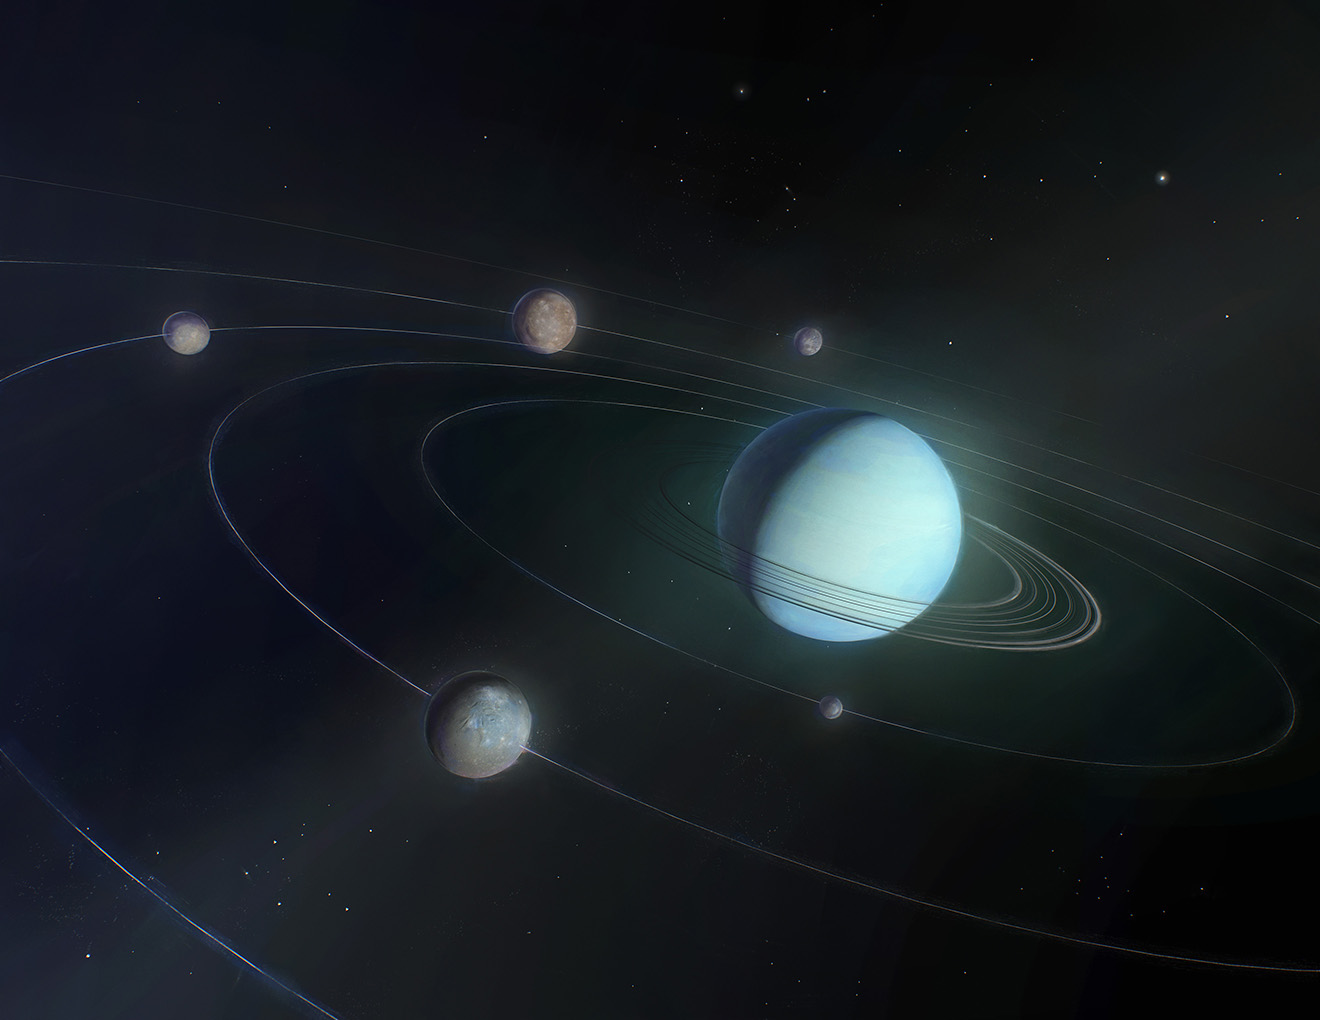 An illustration of the Uranus system and its moons. Credit: NASA/Johns Hopkins APL/Mike Yakovlev.